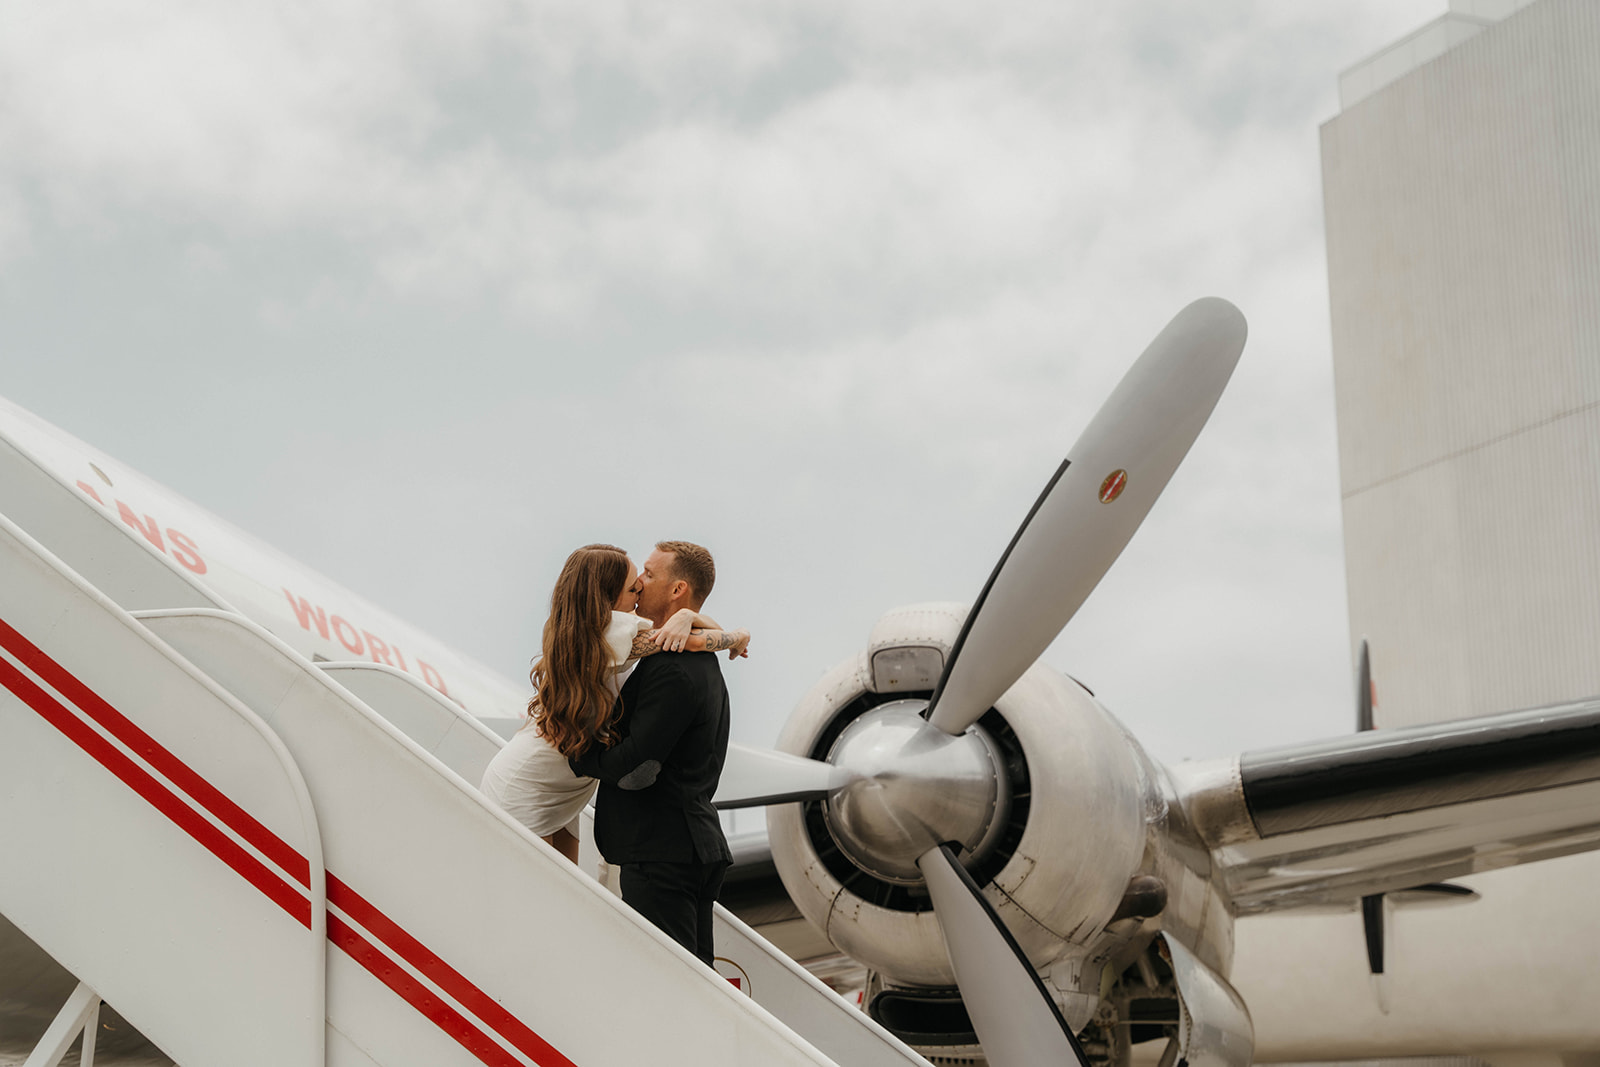 Couple at airport TWA engagement session in new york city